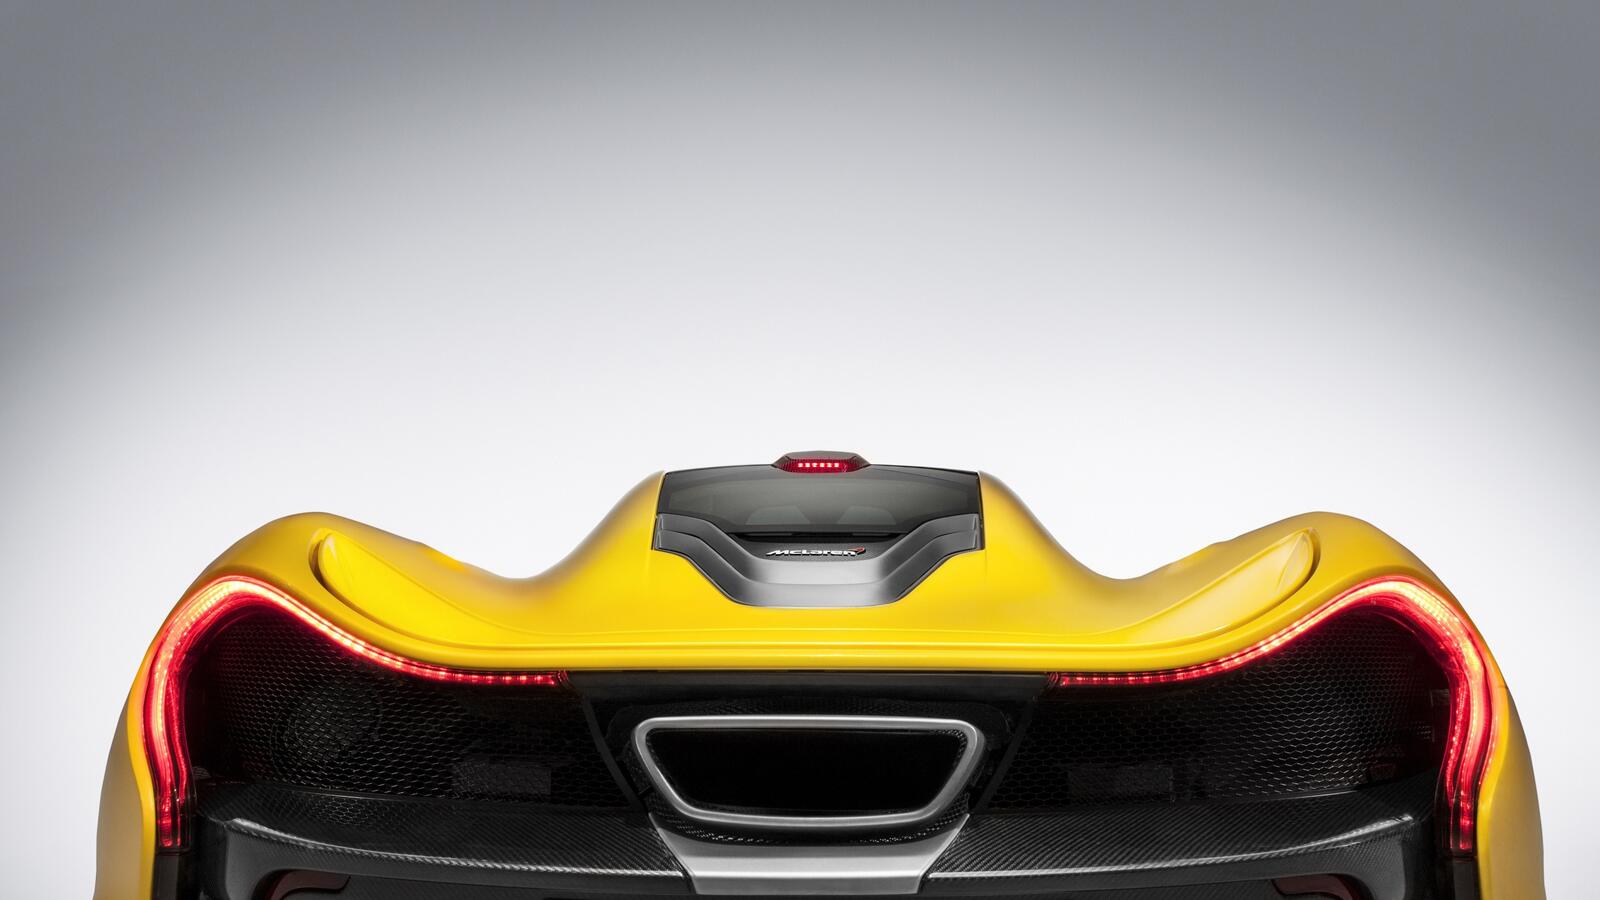 Wallpapers view from behind yellow supercar on the desktop